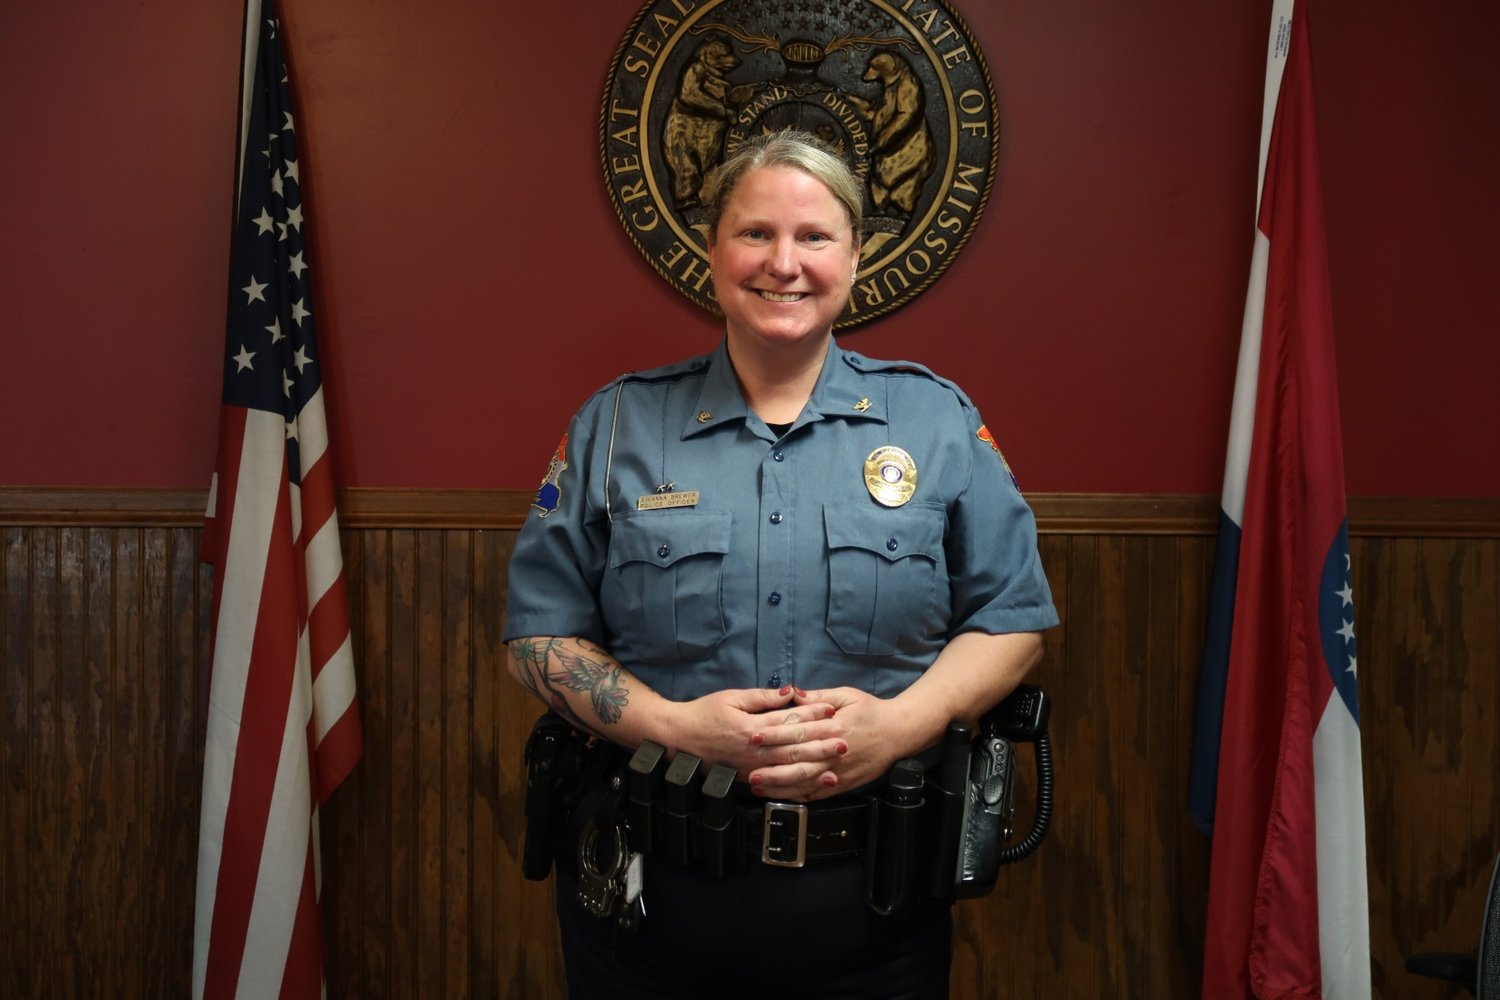 Airriana Brewer was appointed the new chief of the New Florence Police Department on April 21. She replaced David Ingle, who was named New Florence’s city administrator.